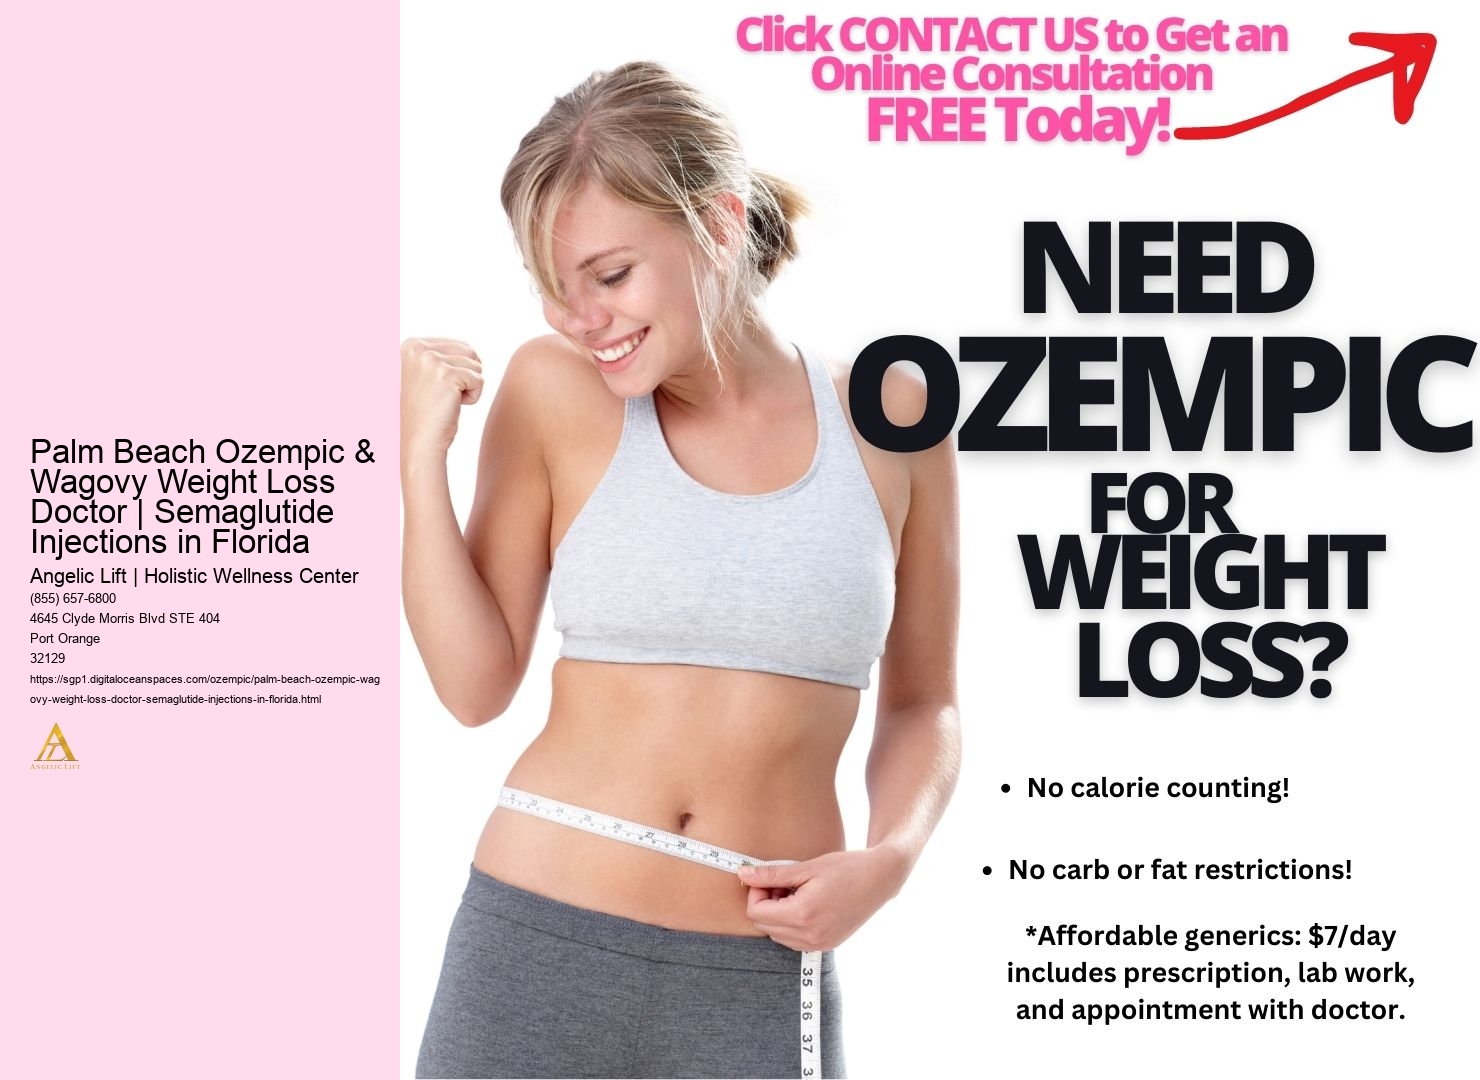 Palm Beach Ozempic & Wagovy Weight Loss Doctor | Semaglutide Injections in Florida